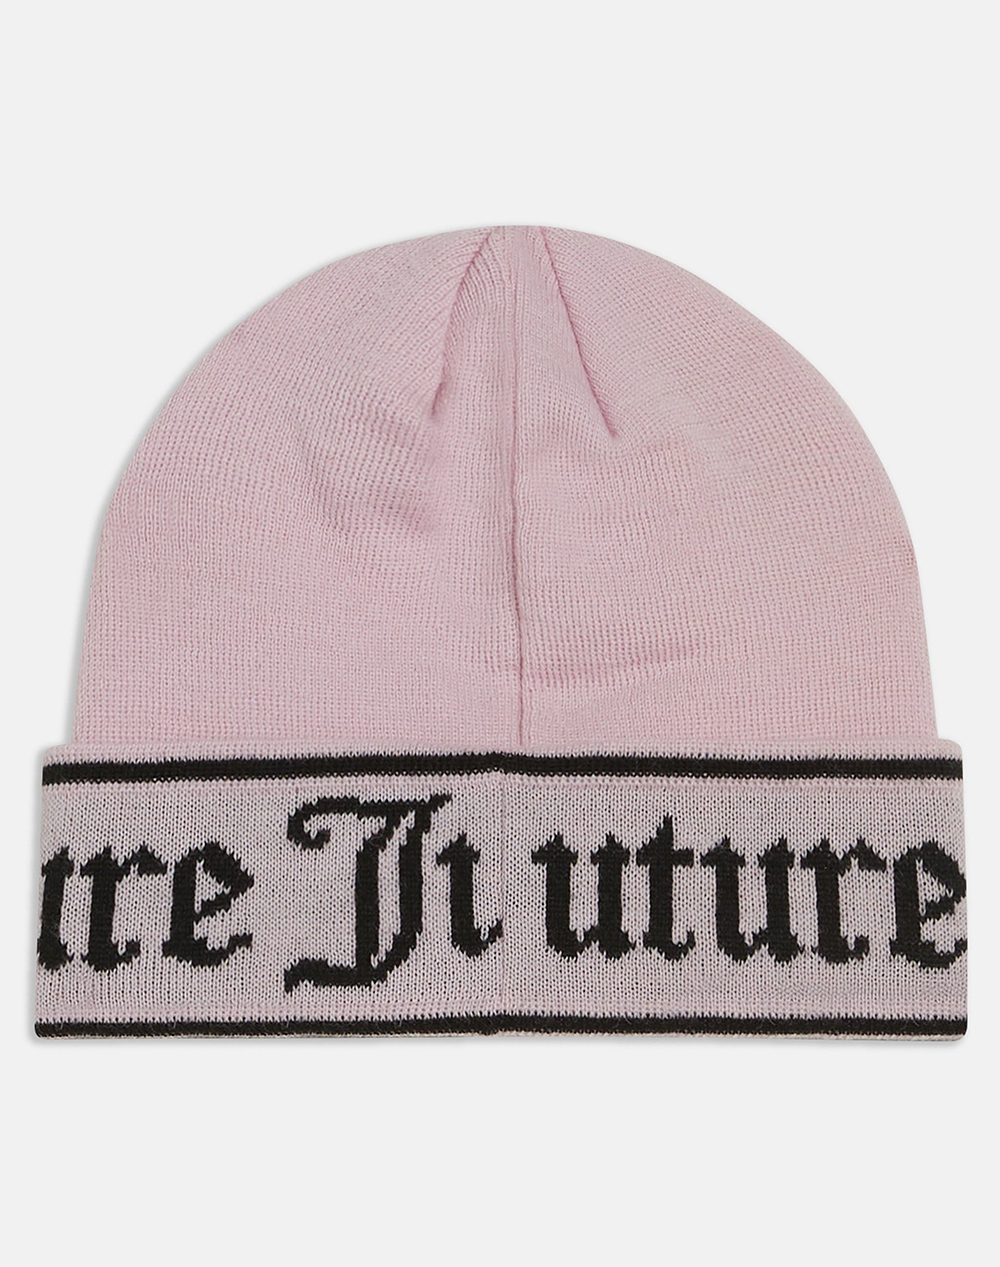 JUICY COUTURE INGRID FLAT KNIT BEANIE